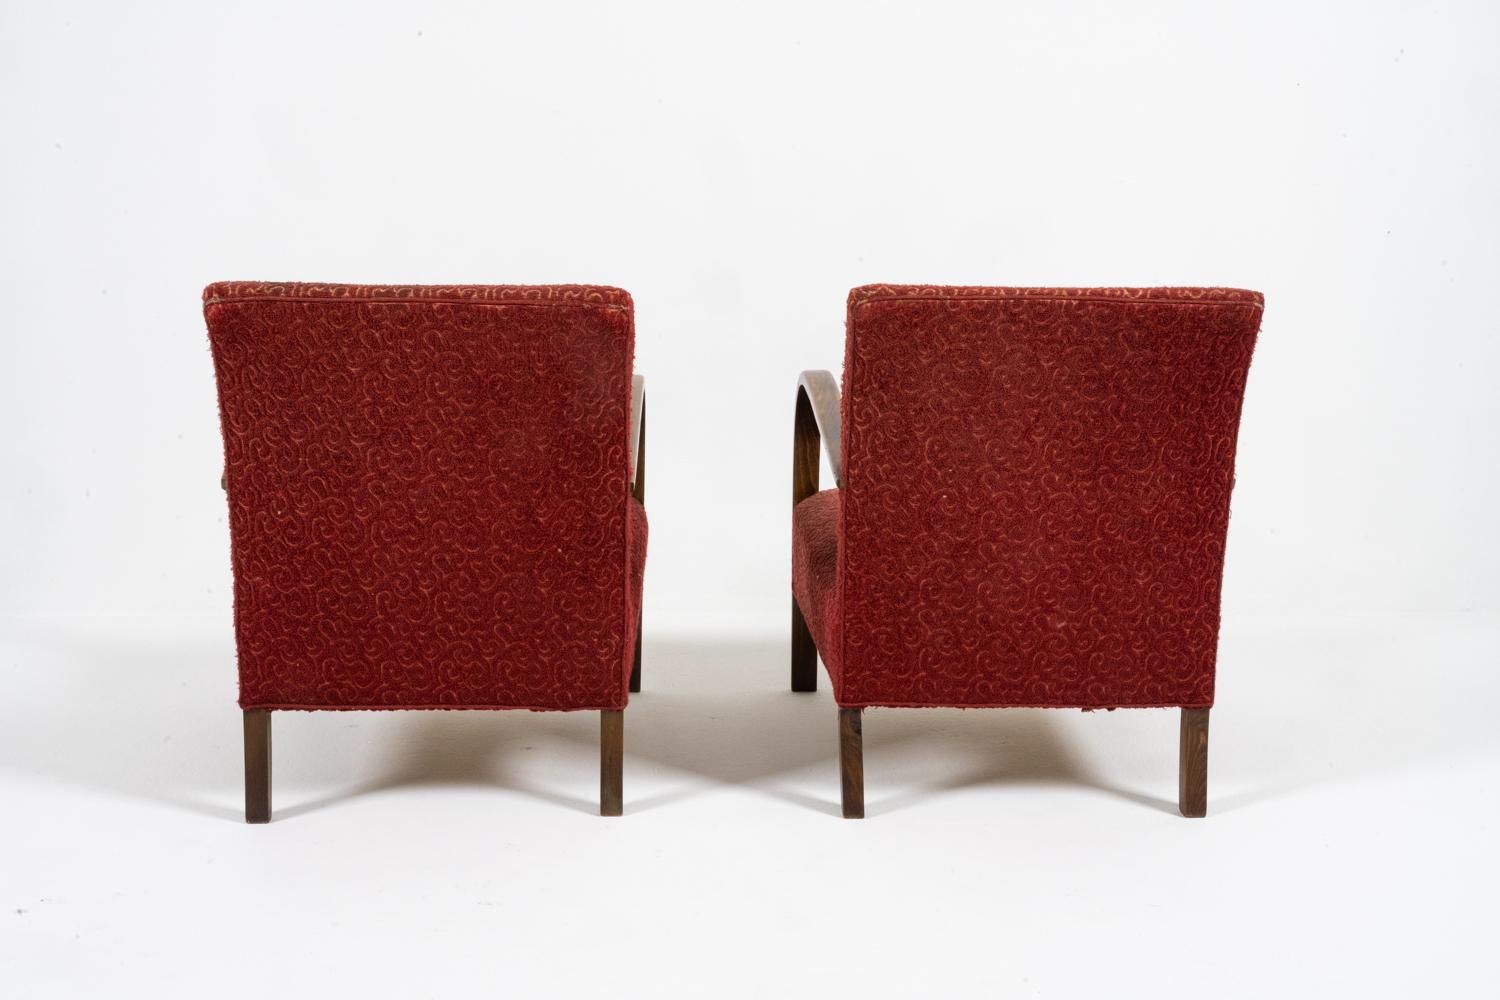 Pair of Danish Modern Lounge Chairs by Fritz Hansen, c. 1950s For Sale 2